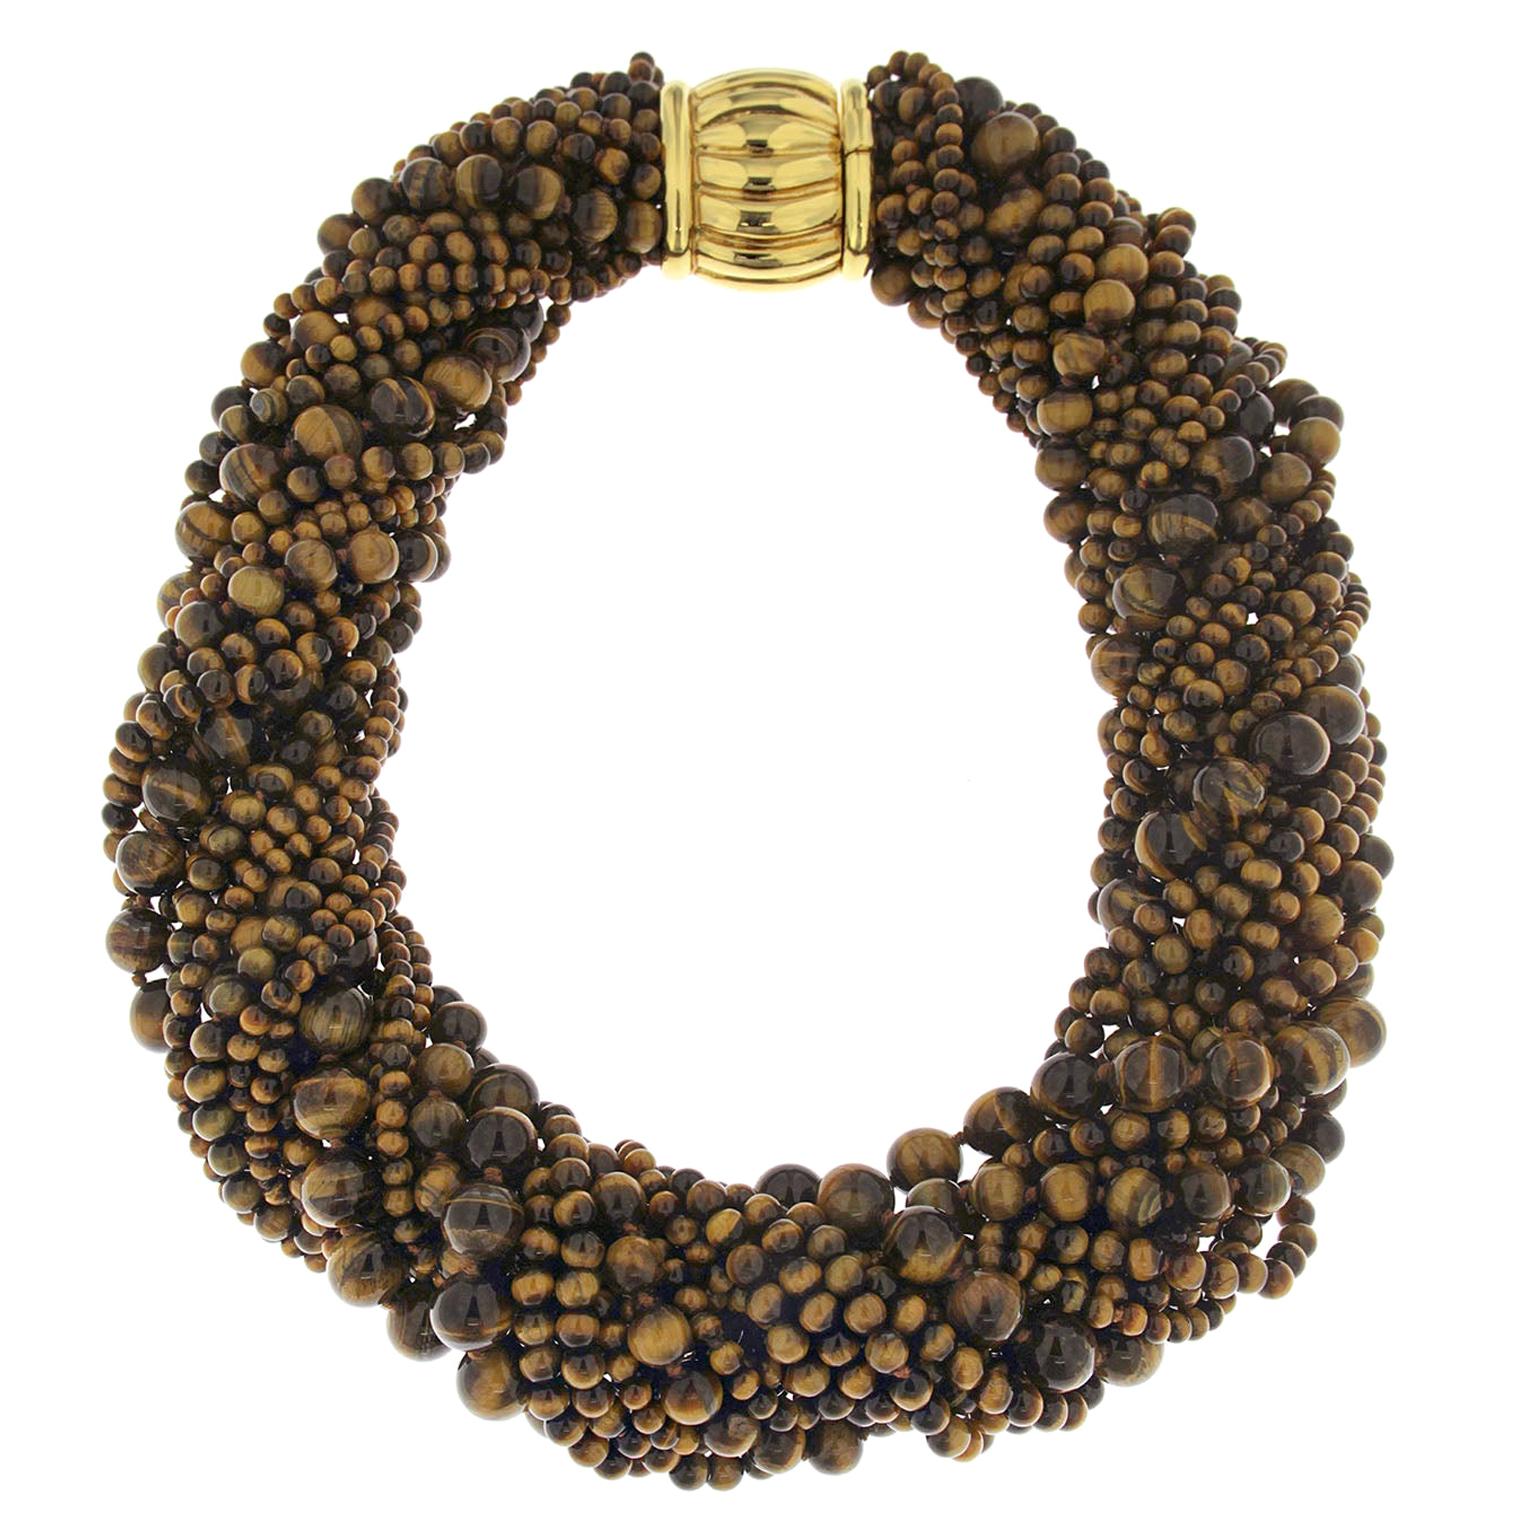 Valentin Magro Tiger's Eye Bead Multi Strand Necklace with Gold Clasp